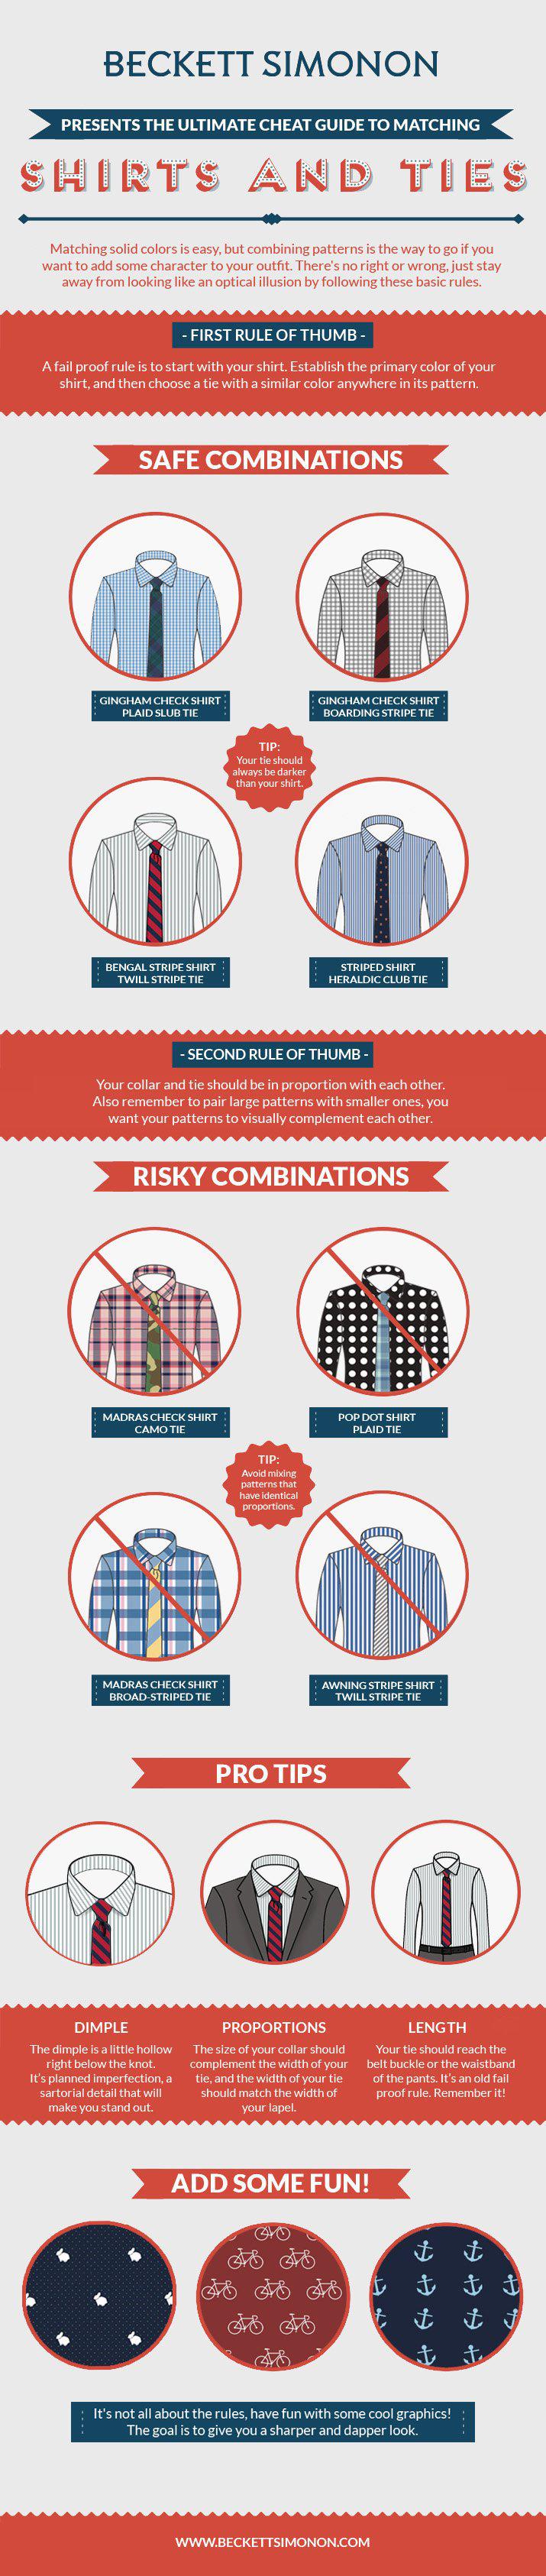 The Ultimate Cheat Guide To Matching Shirts, And Ties By Beckett Simonon